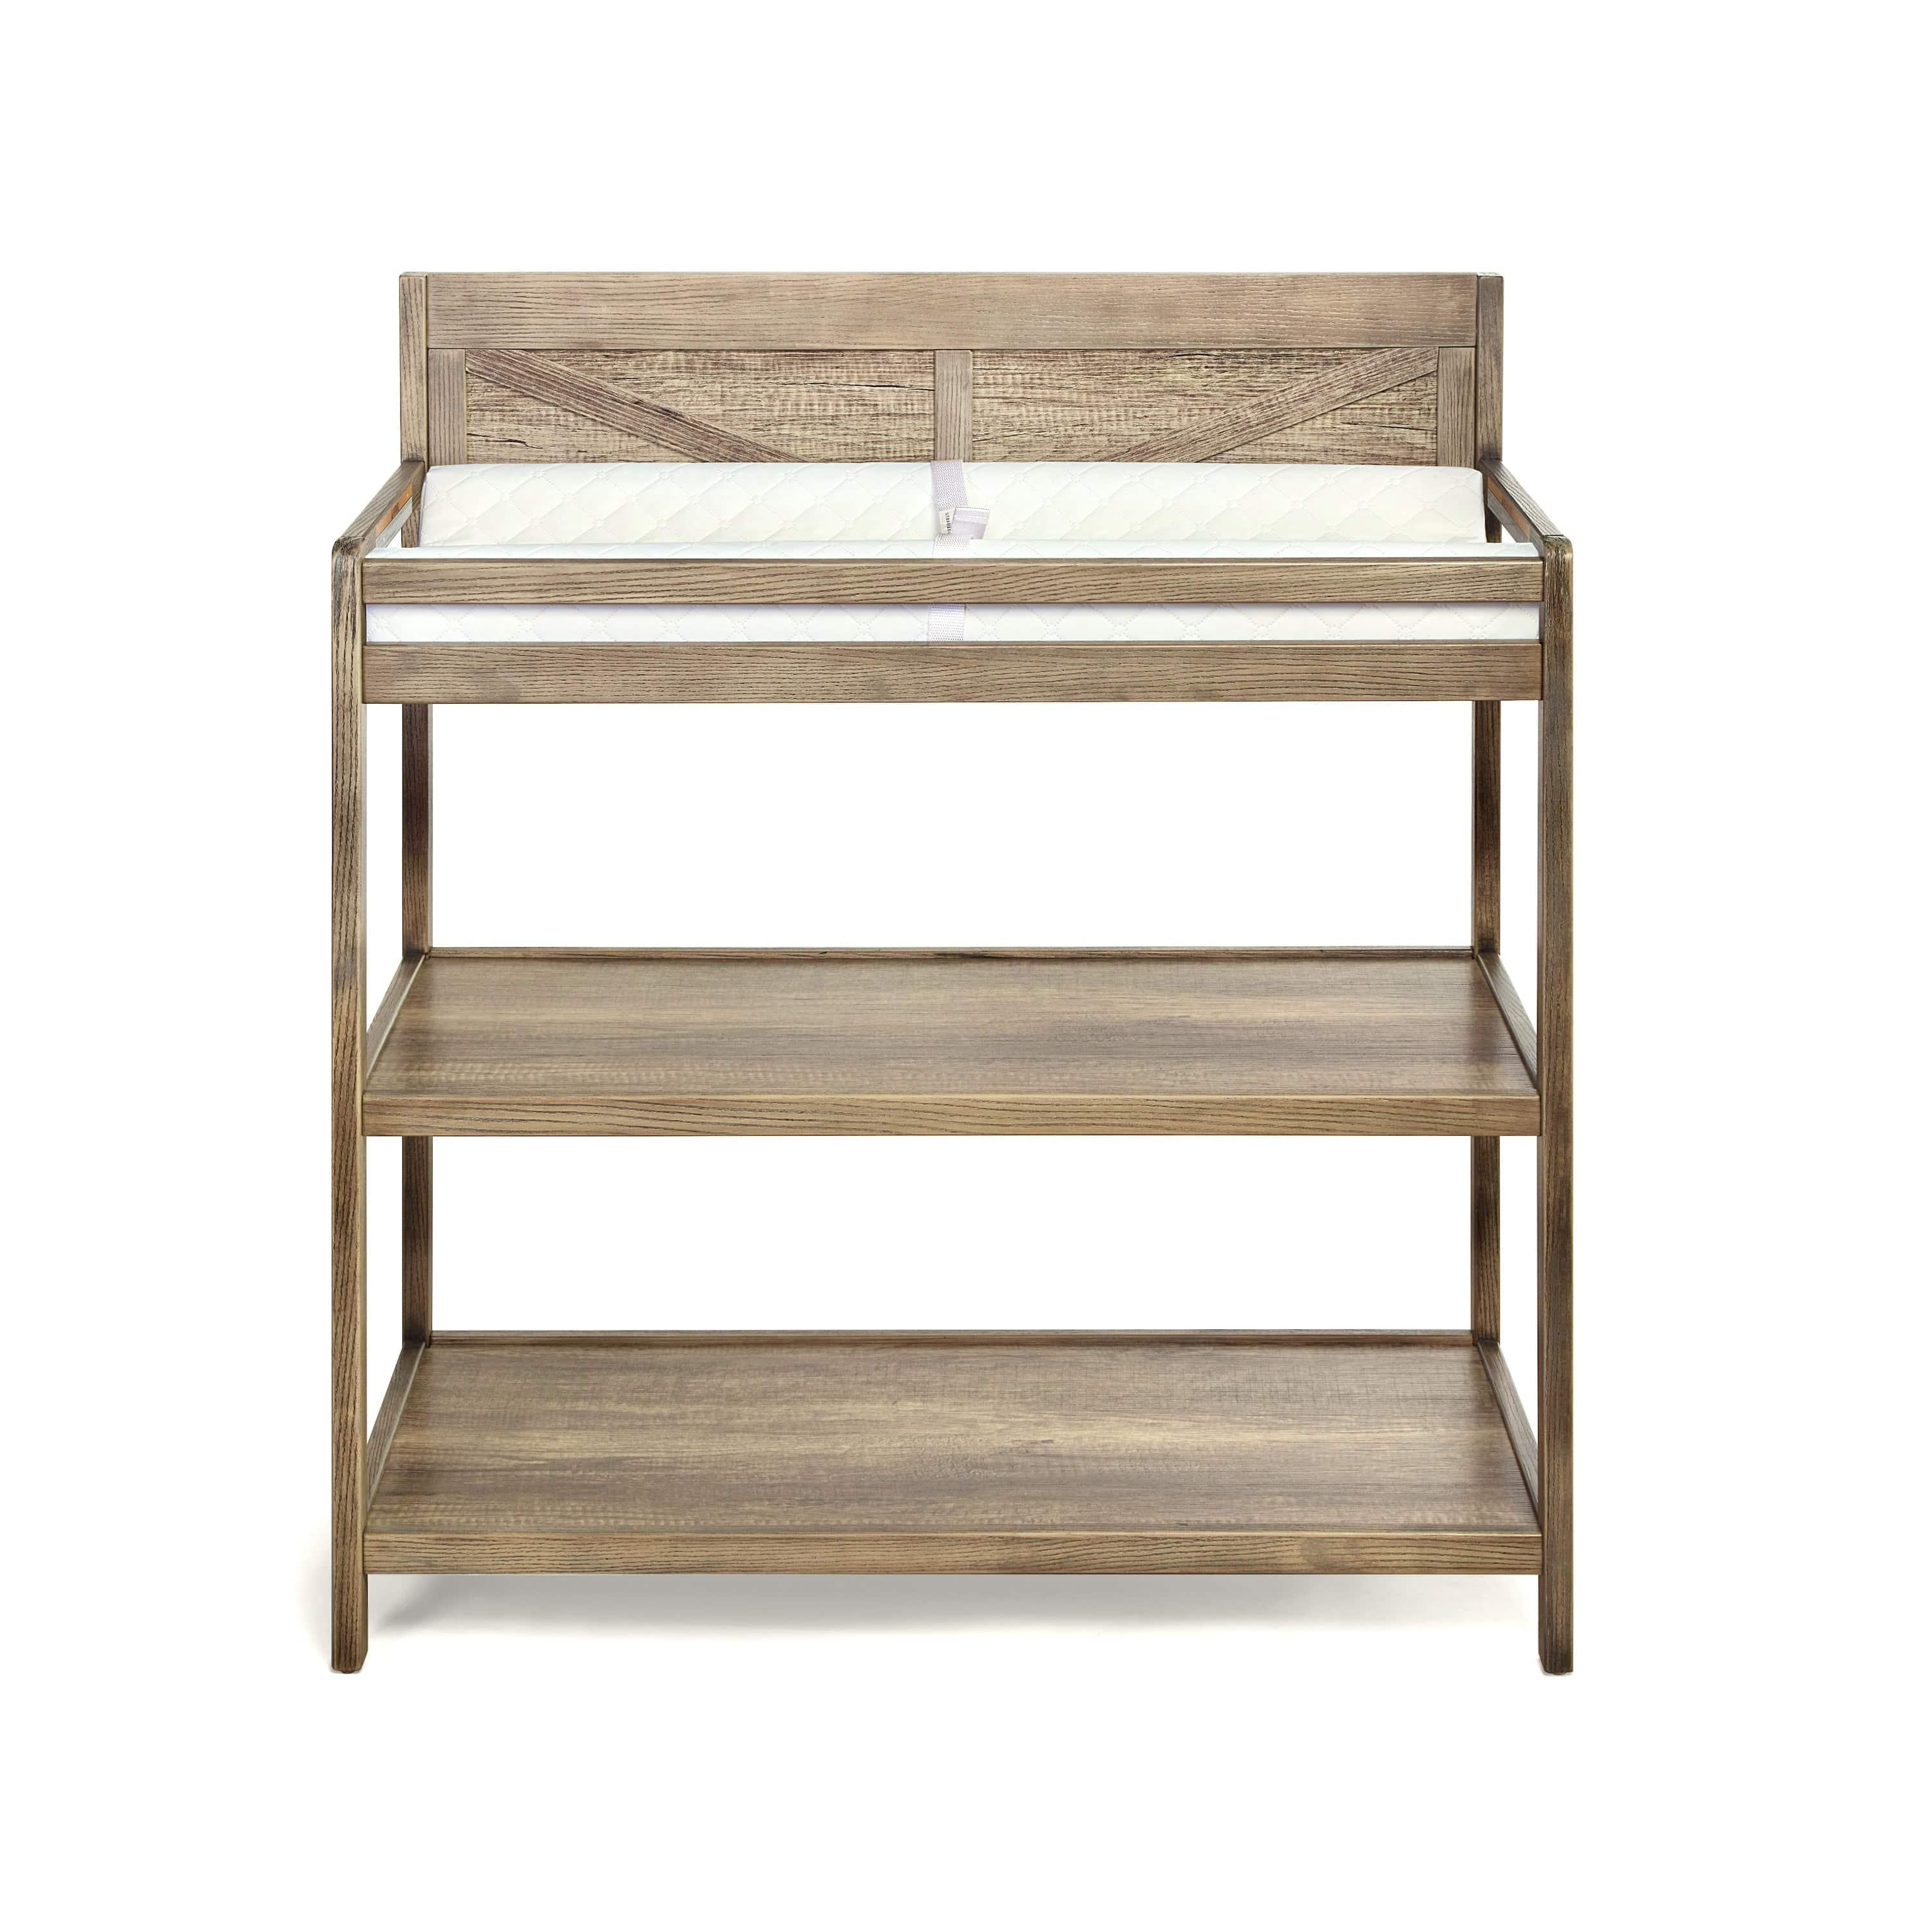 Shop Mambo Chestnut Universal Changing Table Mademoiselle Home Decor